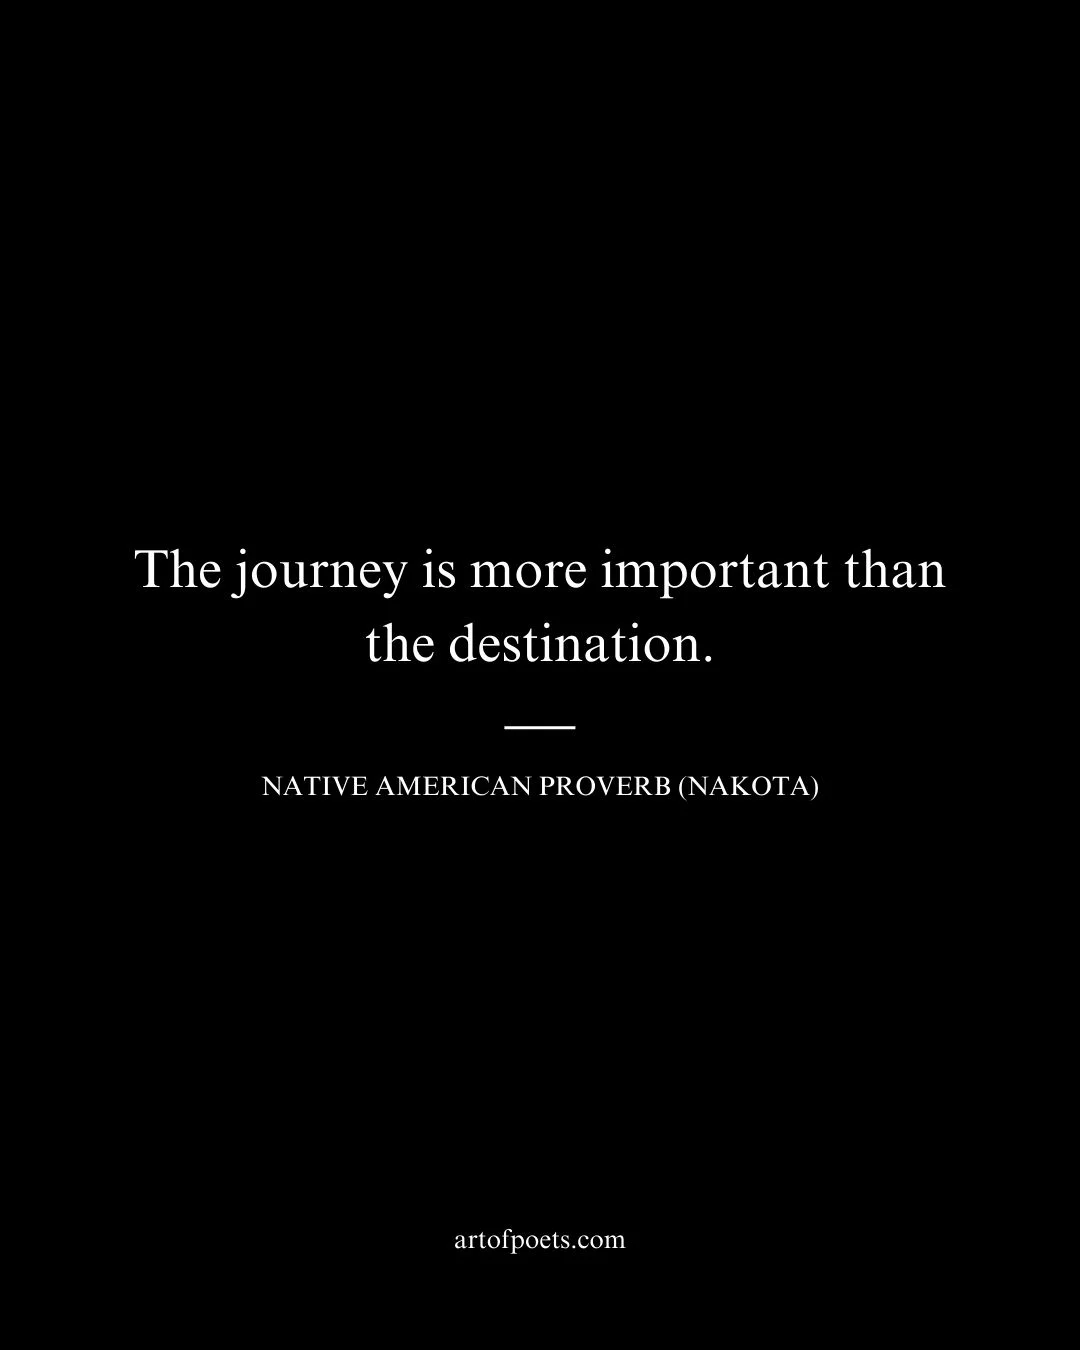 The journey is more important than the destination